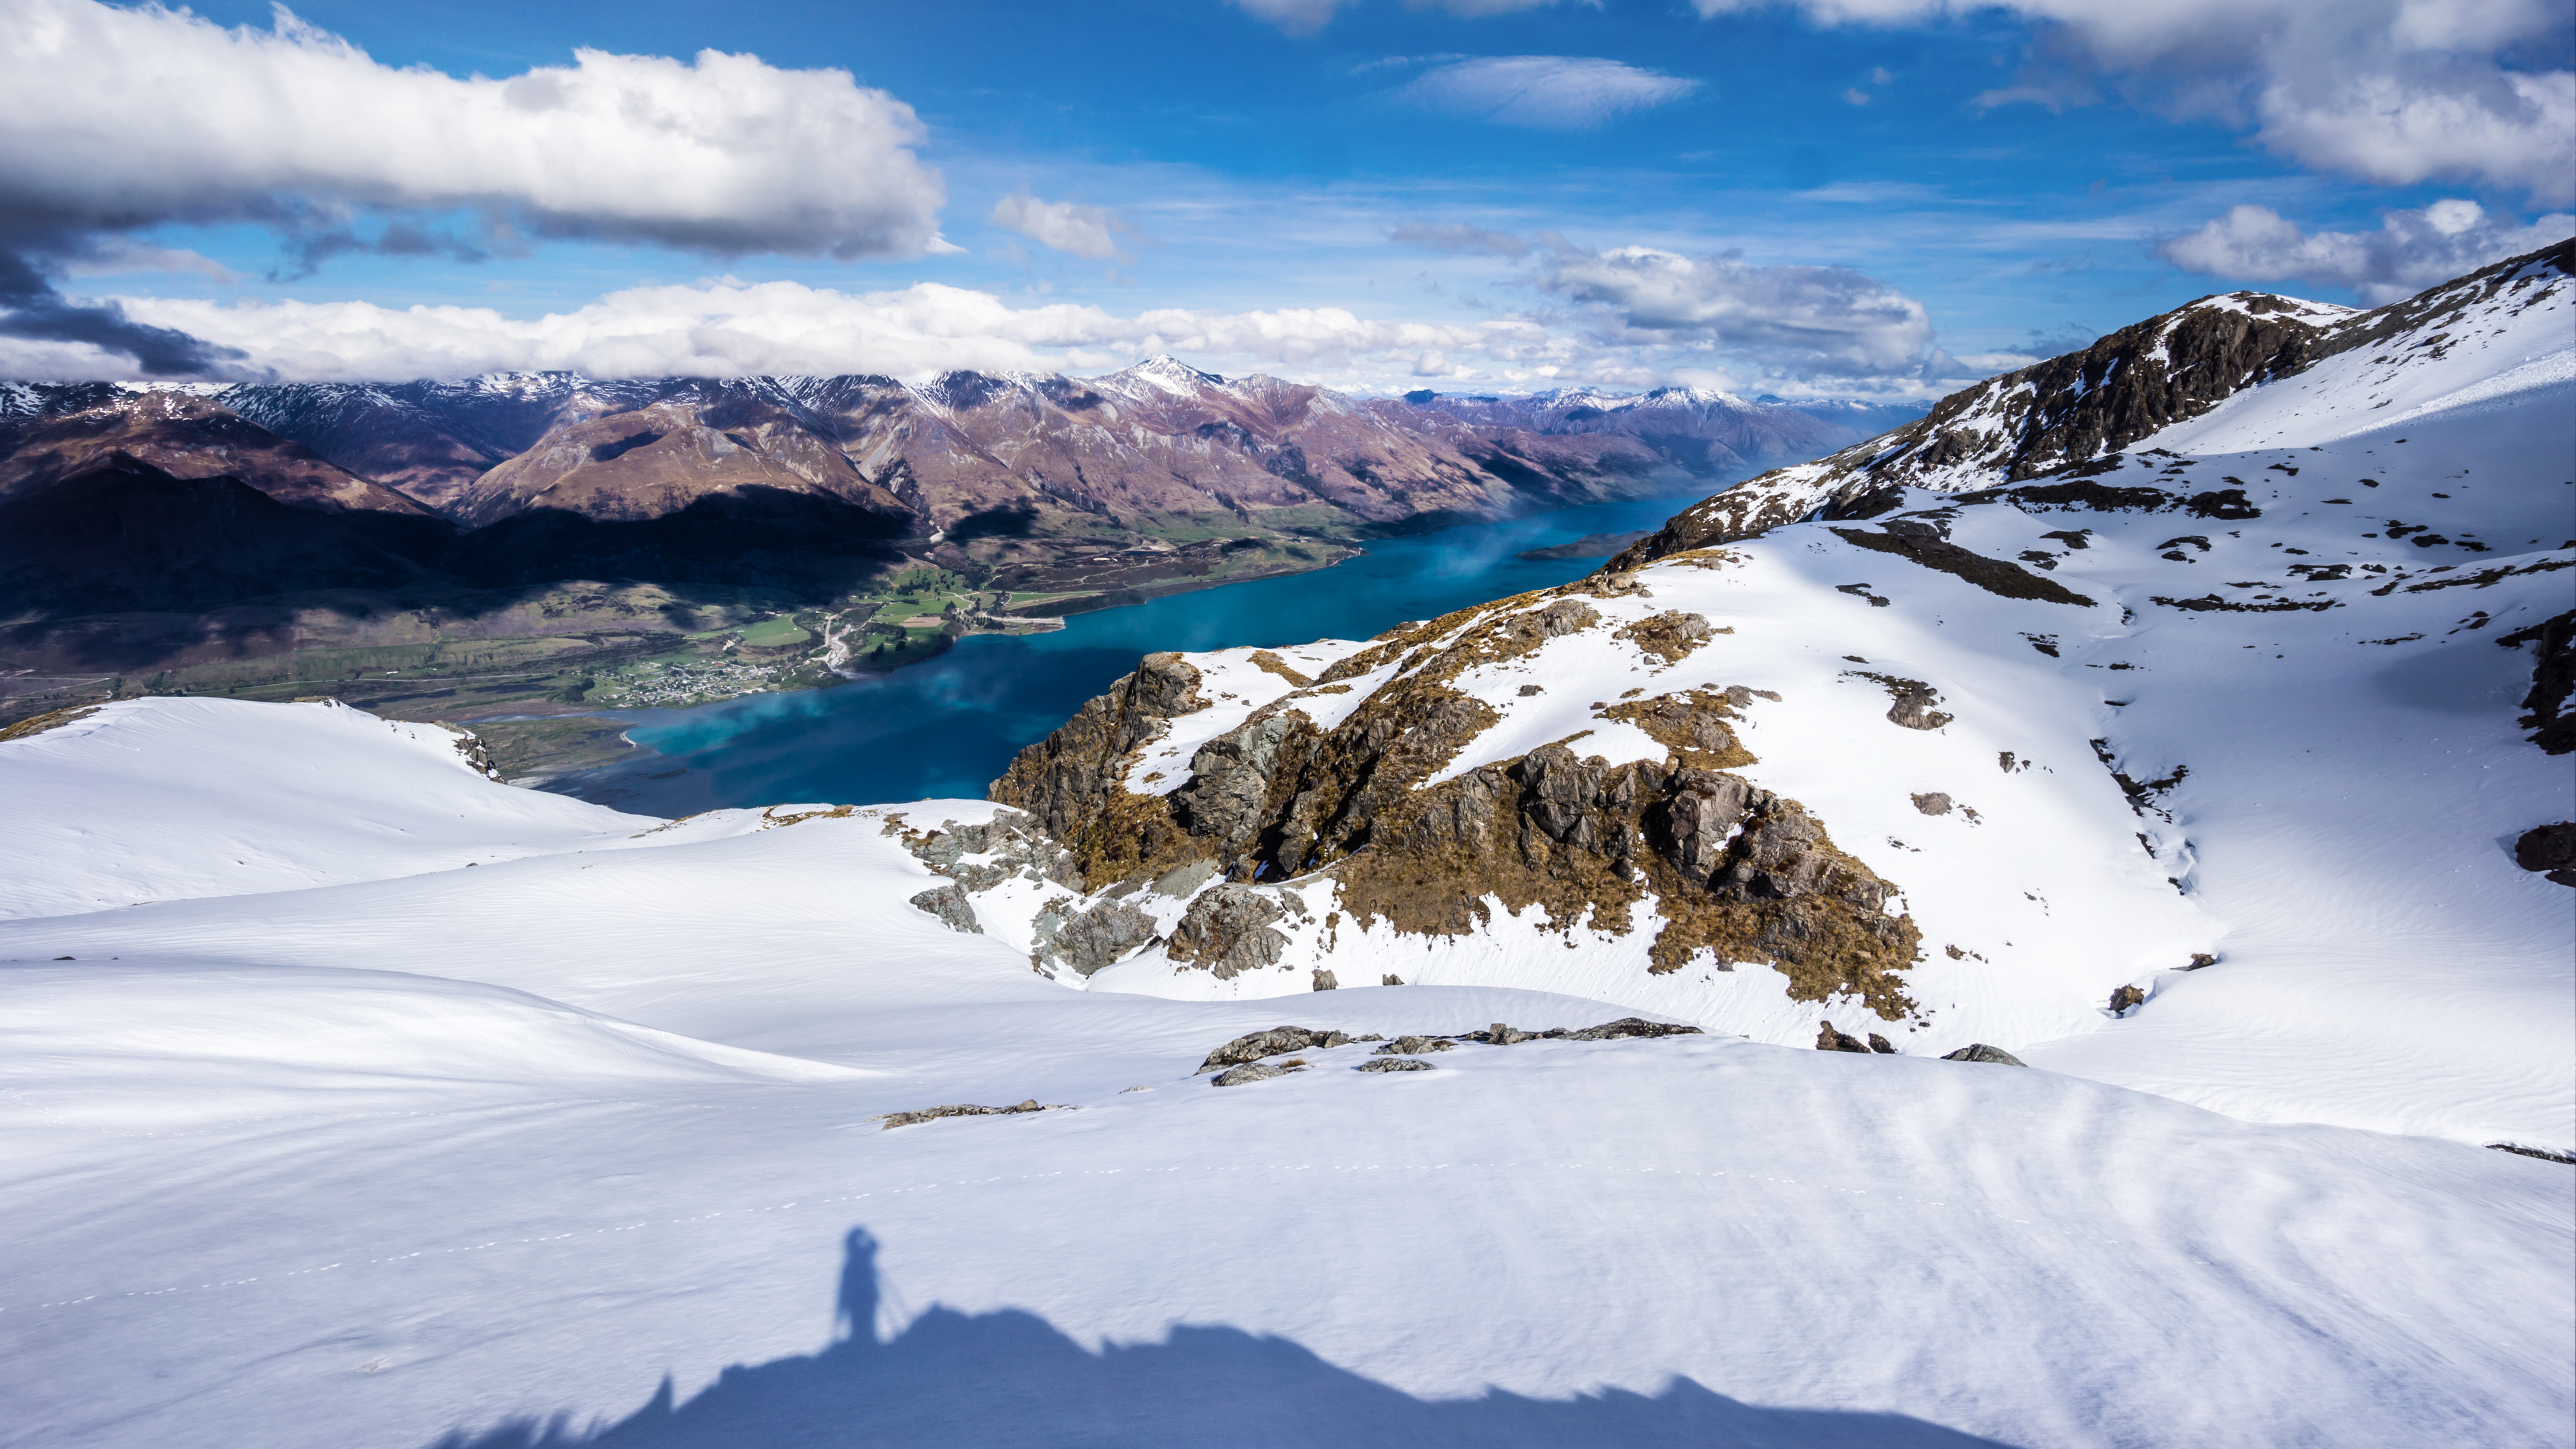 General 3840x2160 landscape 4K Queenstown New Zealand snow nature mountains clouds water